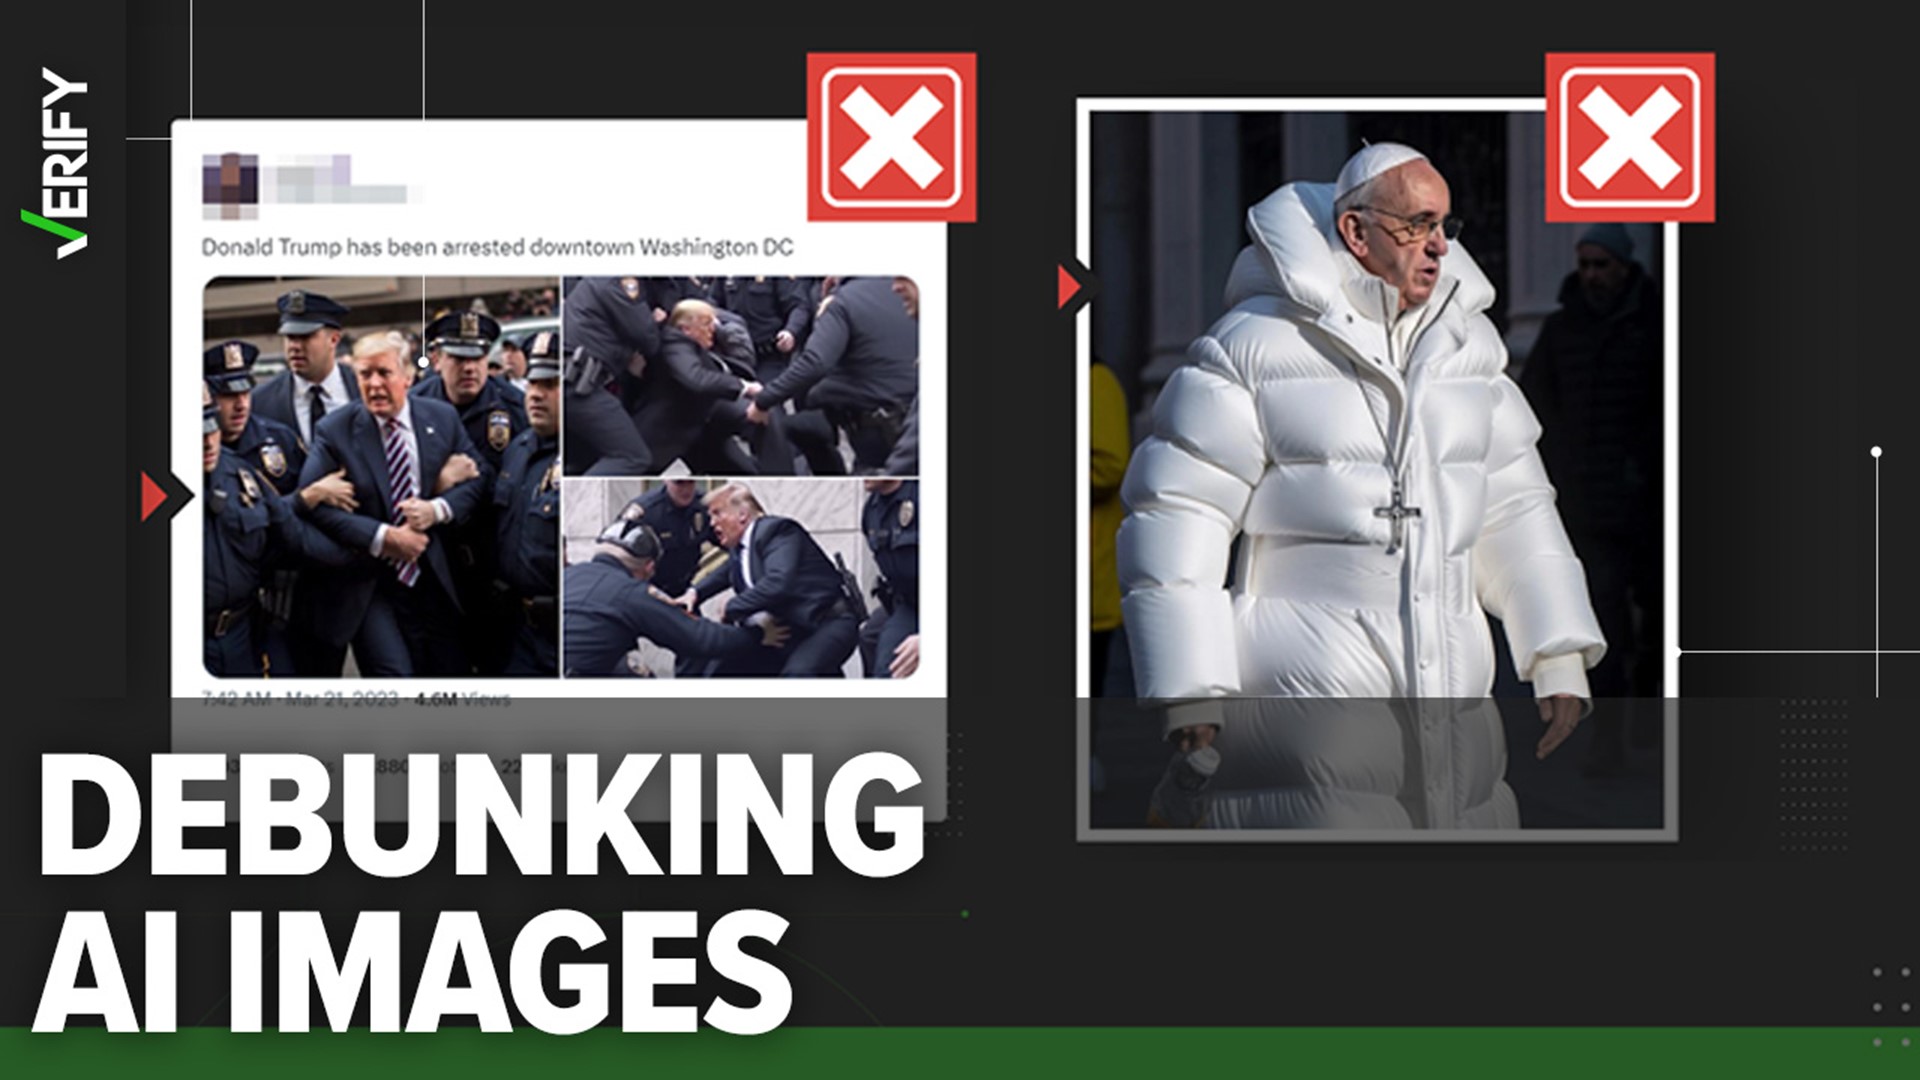 These photos claiming to show Trump being arrested and the Pope in a puffer coat aren’t real. They were created with Midjourney, an artificial intelligence program.